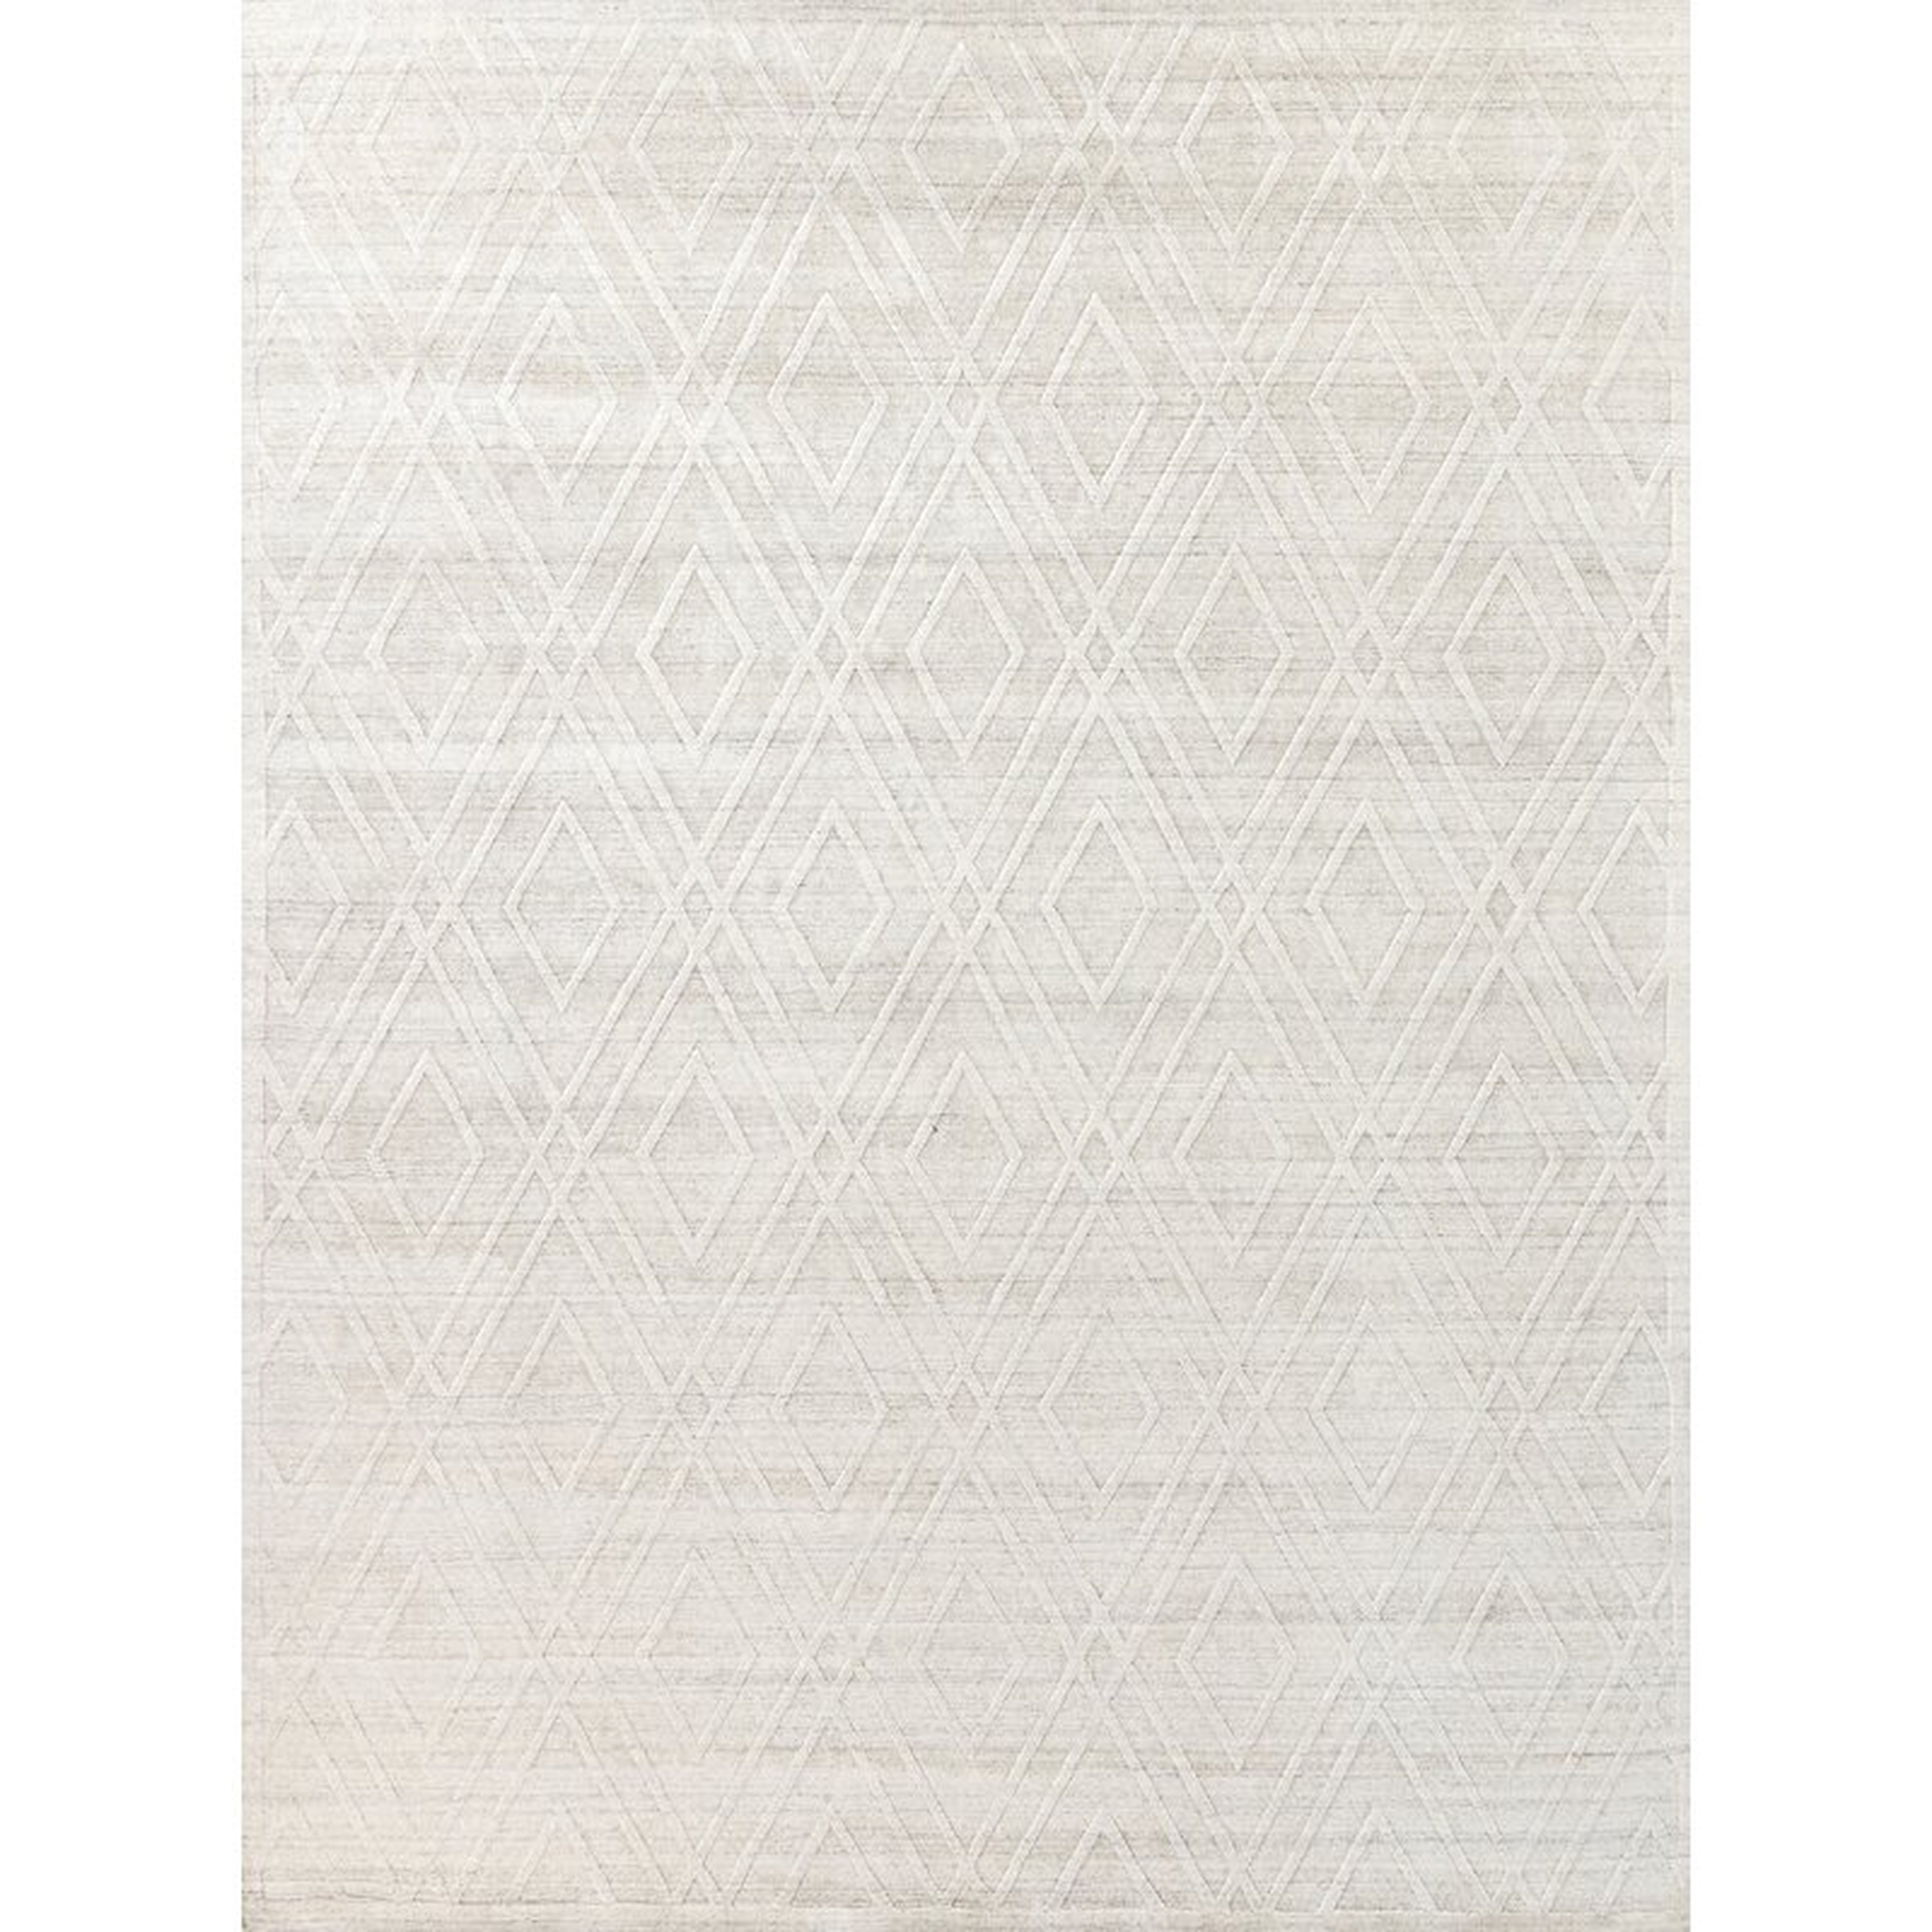 EXQUISITE RUGS Castelli Geometric Hand-Loomed Wool Ivory Area Rug - Perigold